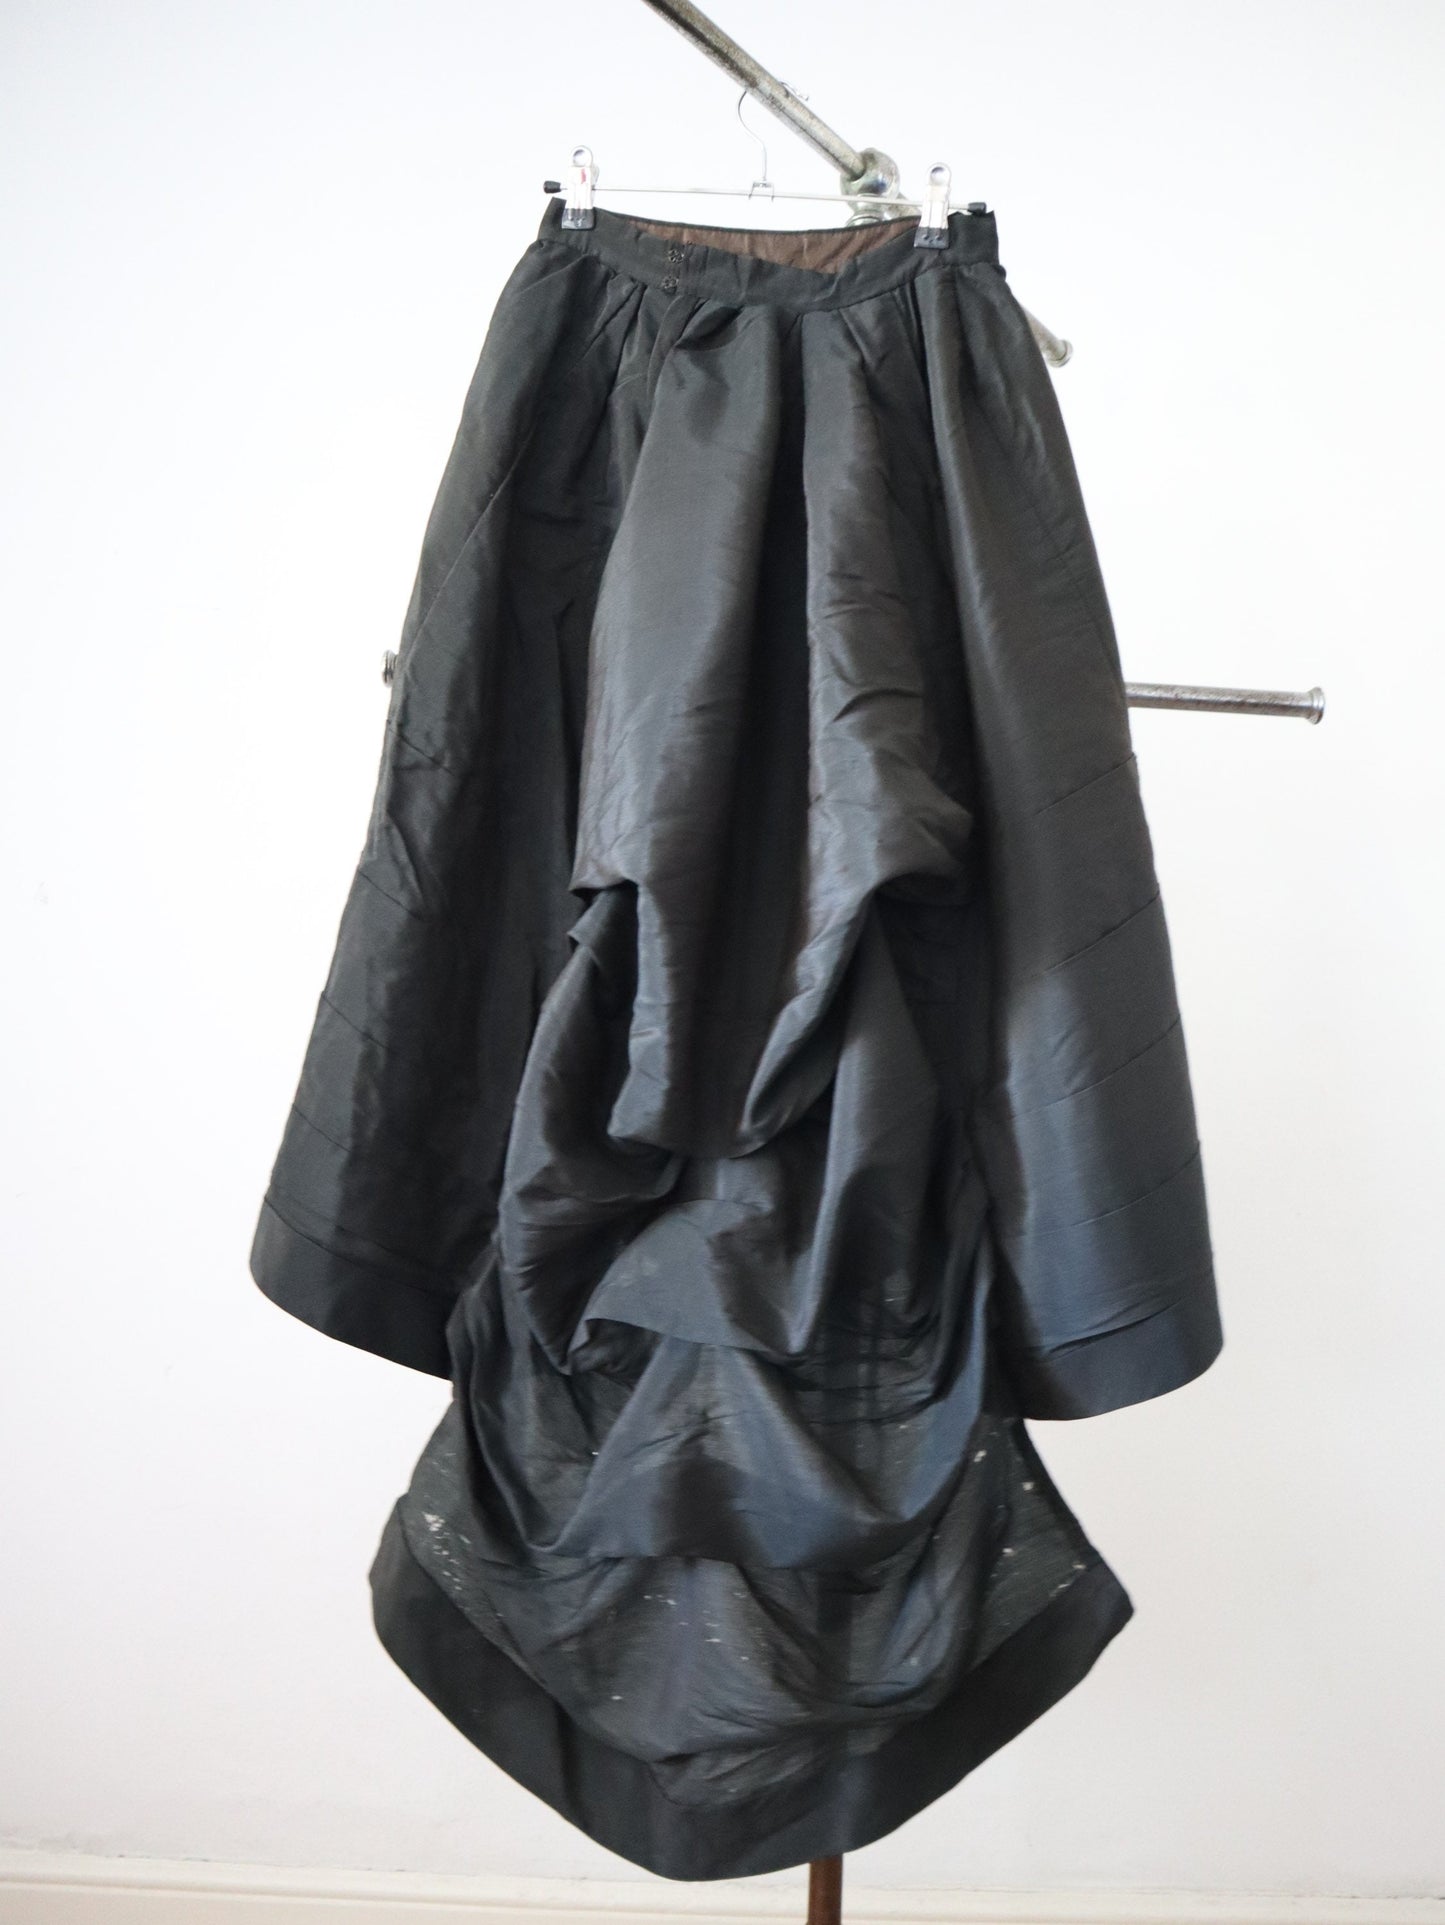 Antique French Black Silk Two Piece Outfit Costume Bodice Skirt Bows 19th Century